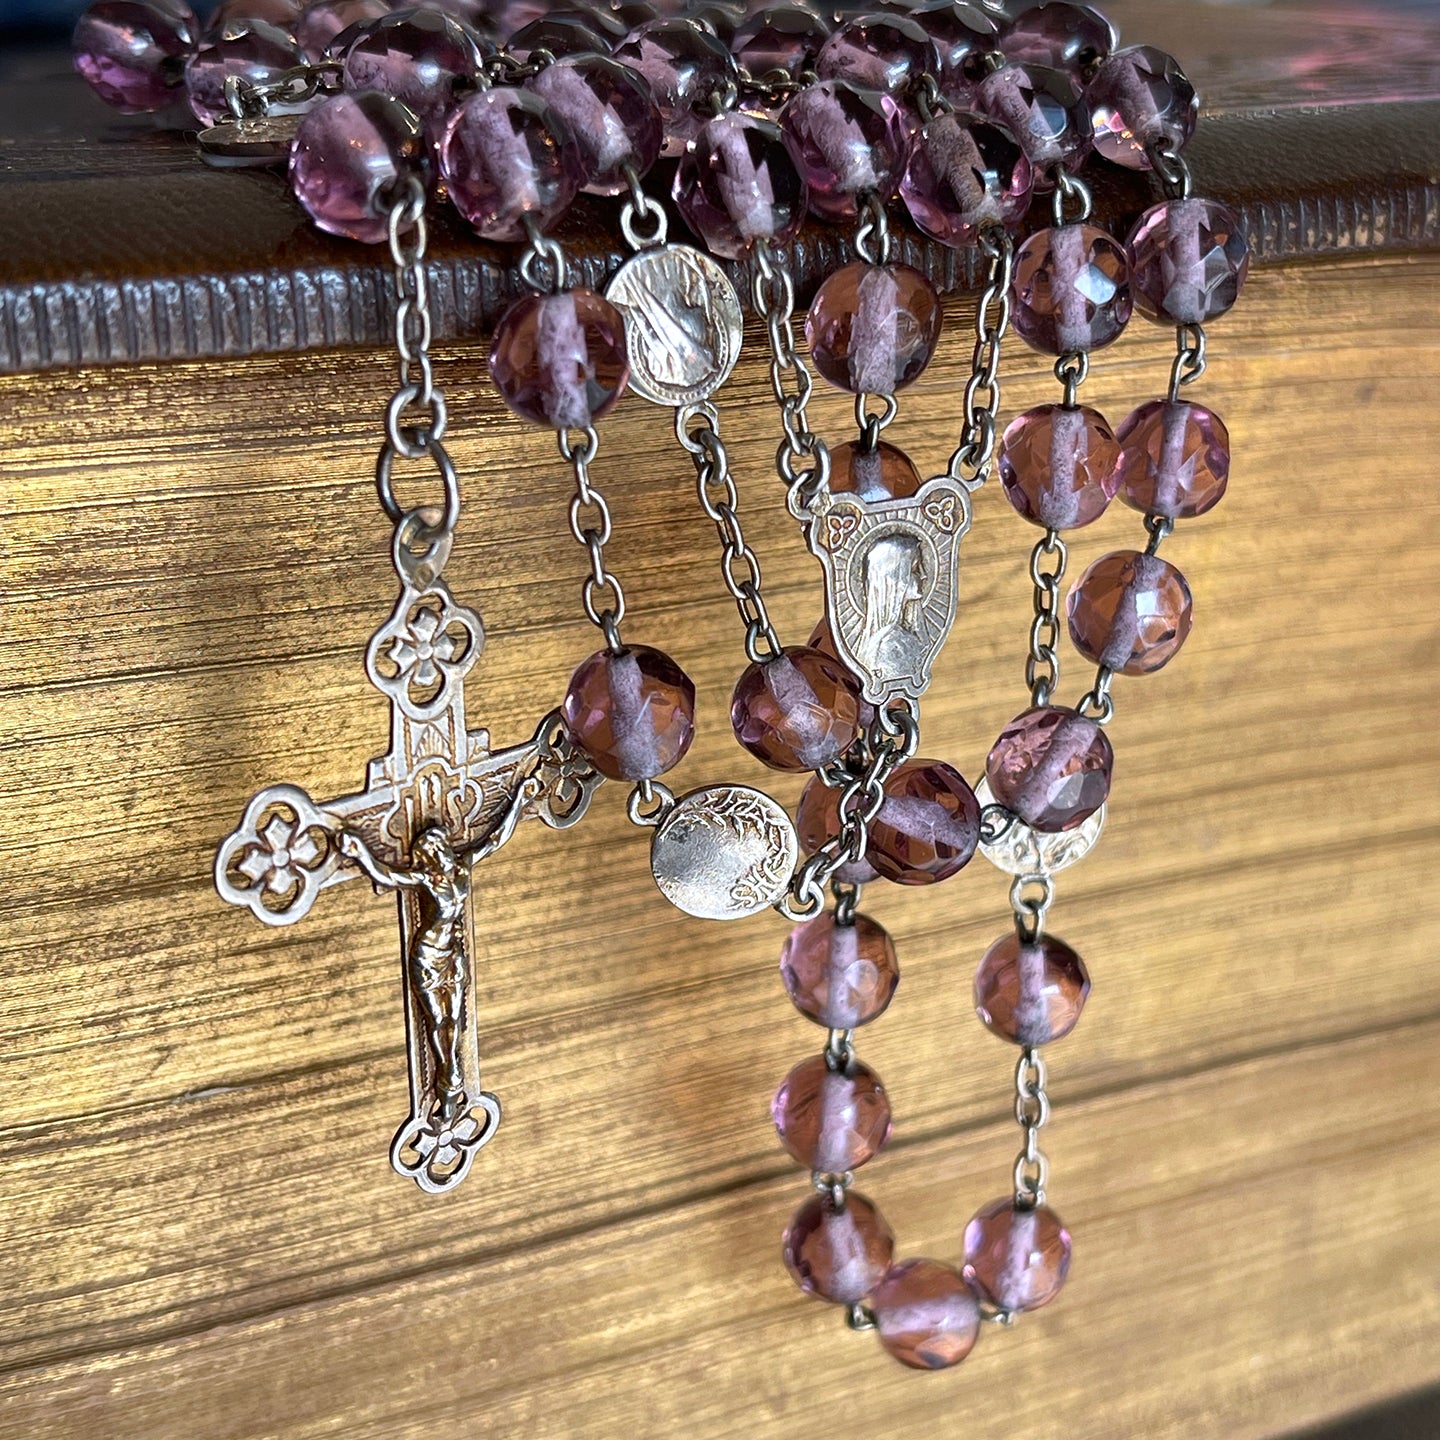 Antique French Engraved Silver and Glass Rosary